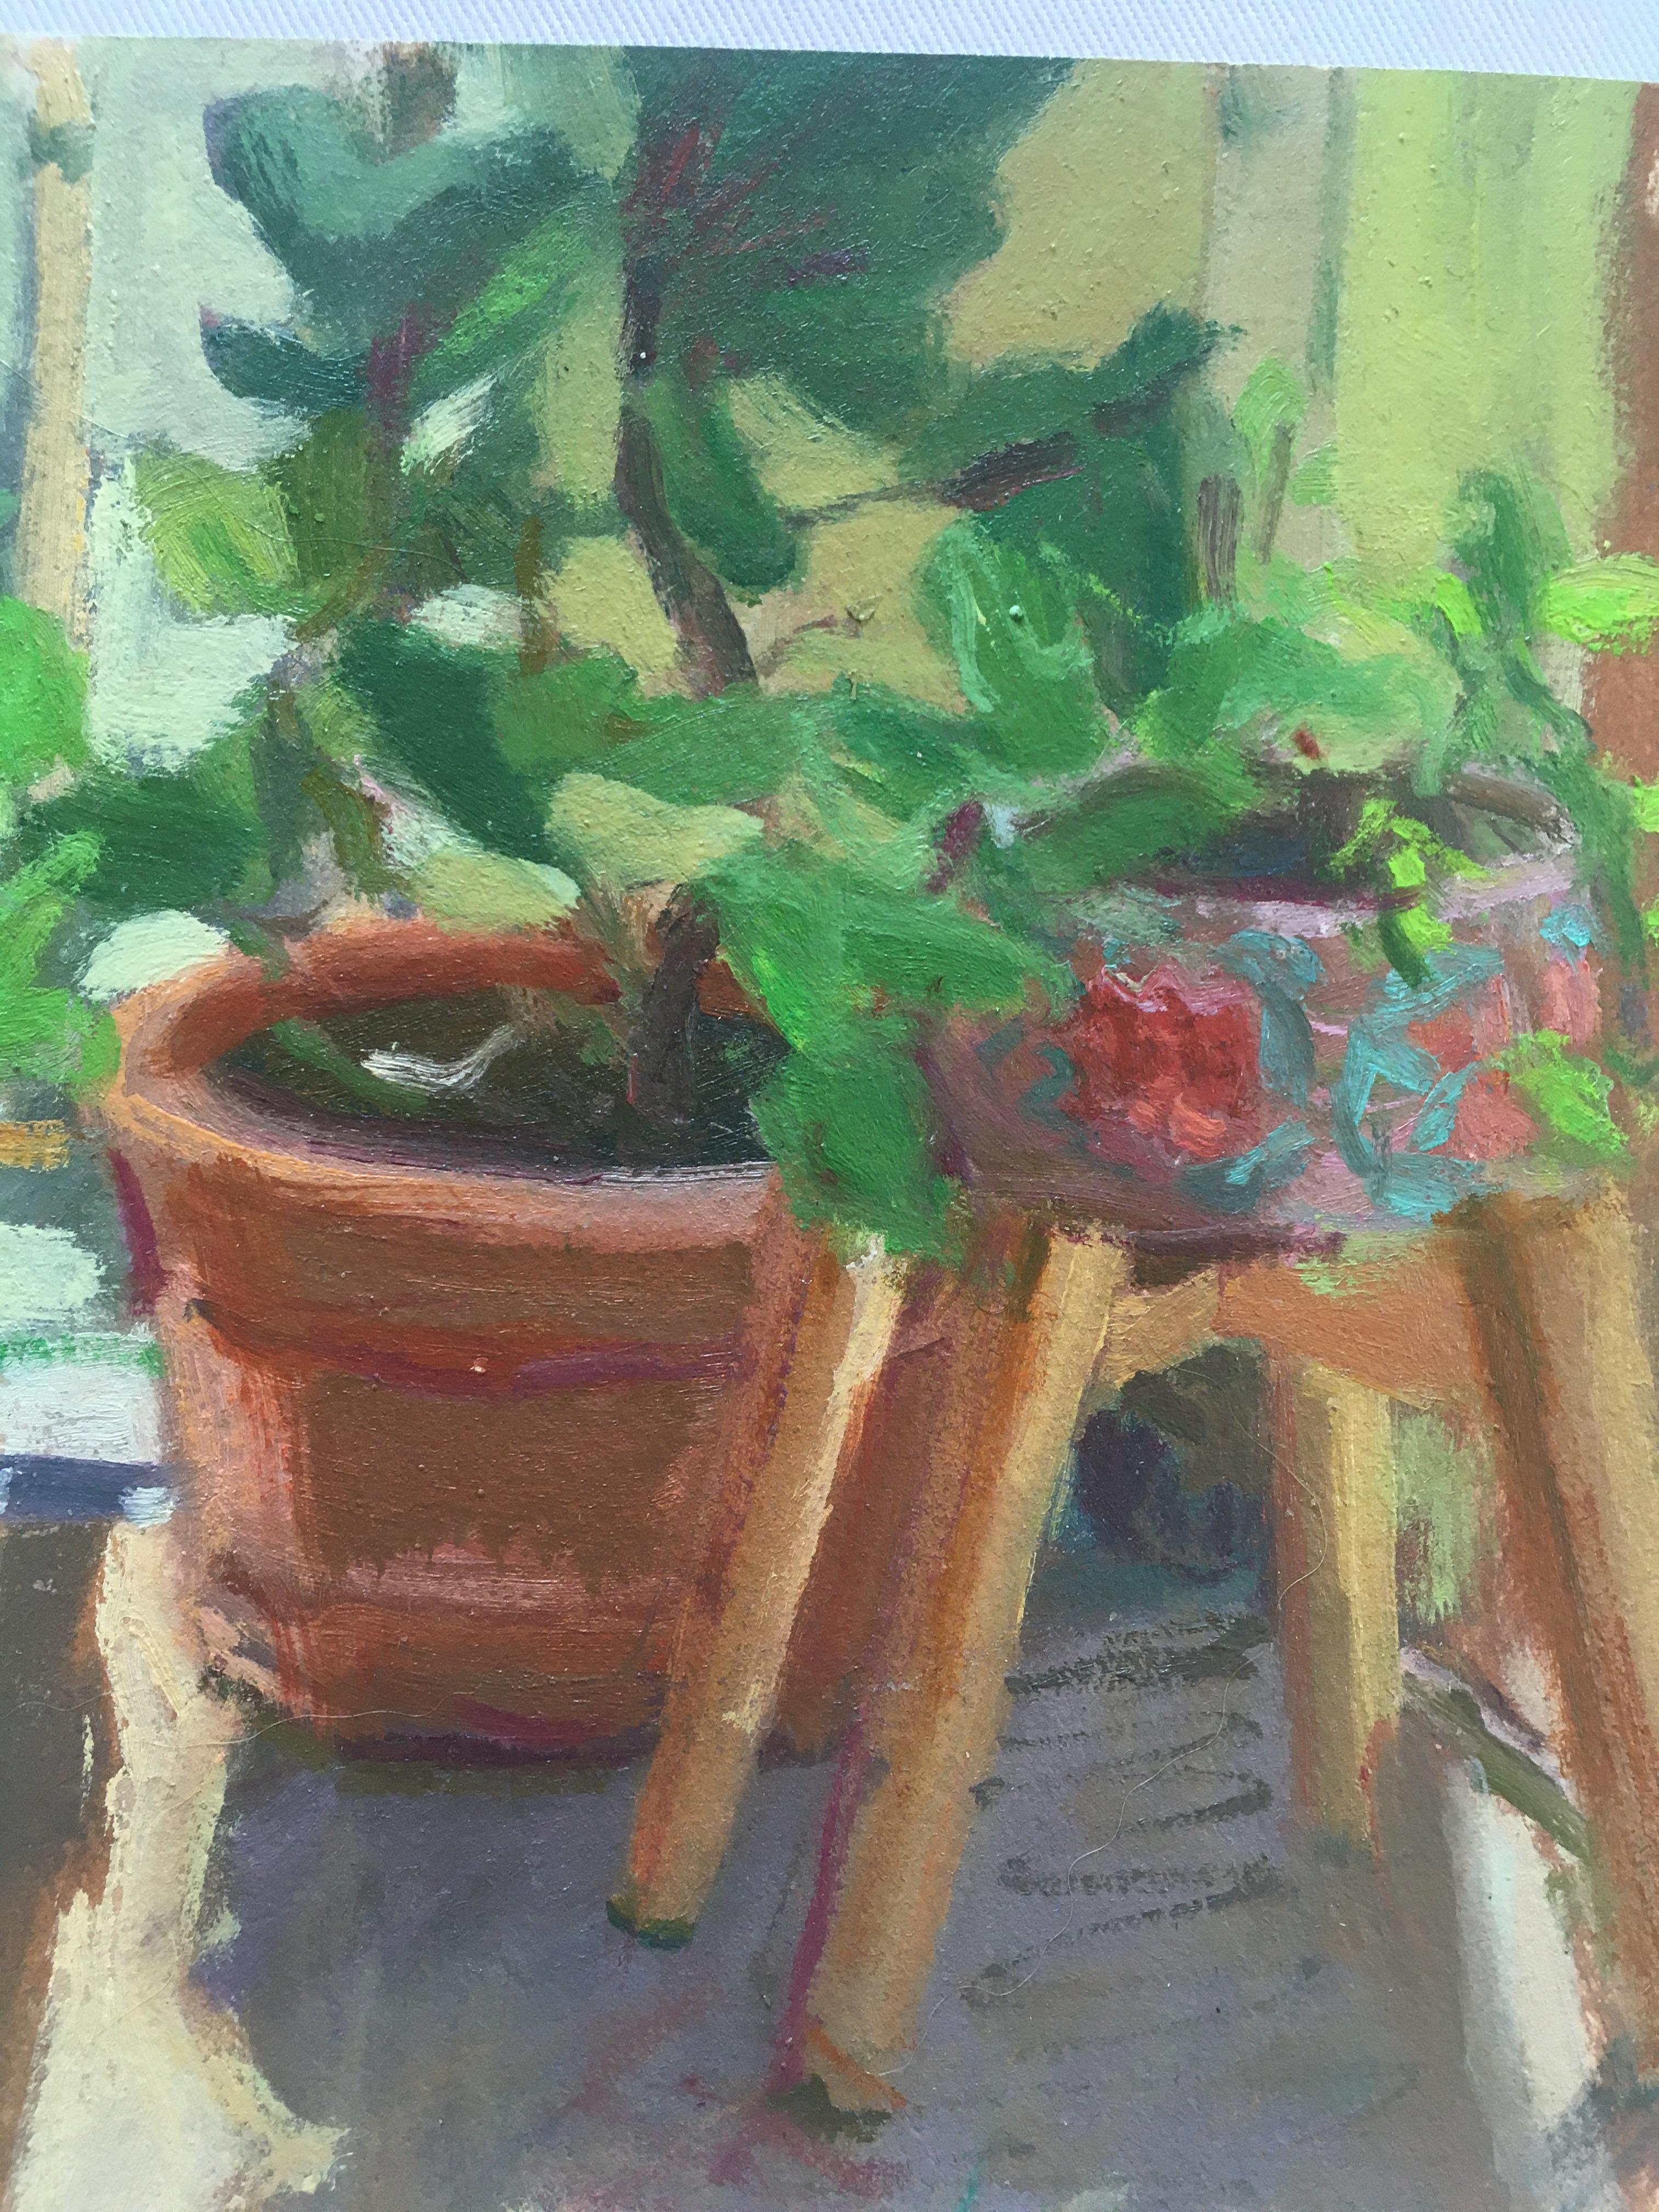 PORCH PLANTS - Still-life Painting w/ Backlit Sun  Oil on Arches Oil Paper - Brown Still-Life Painting by Amanda Joy Brown